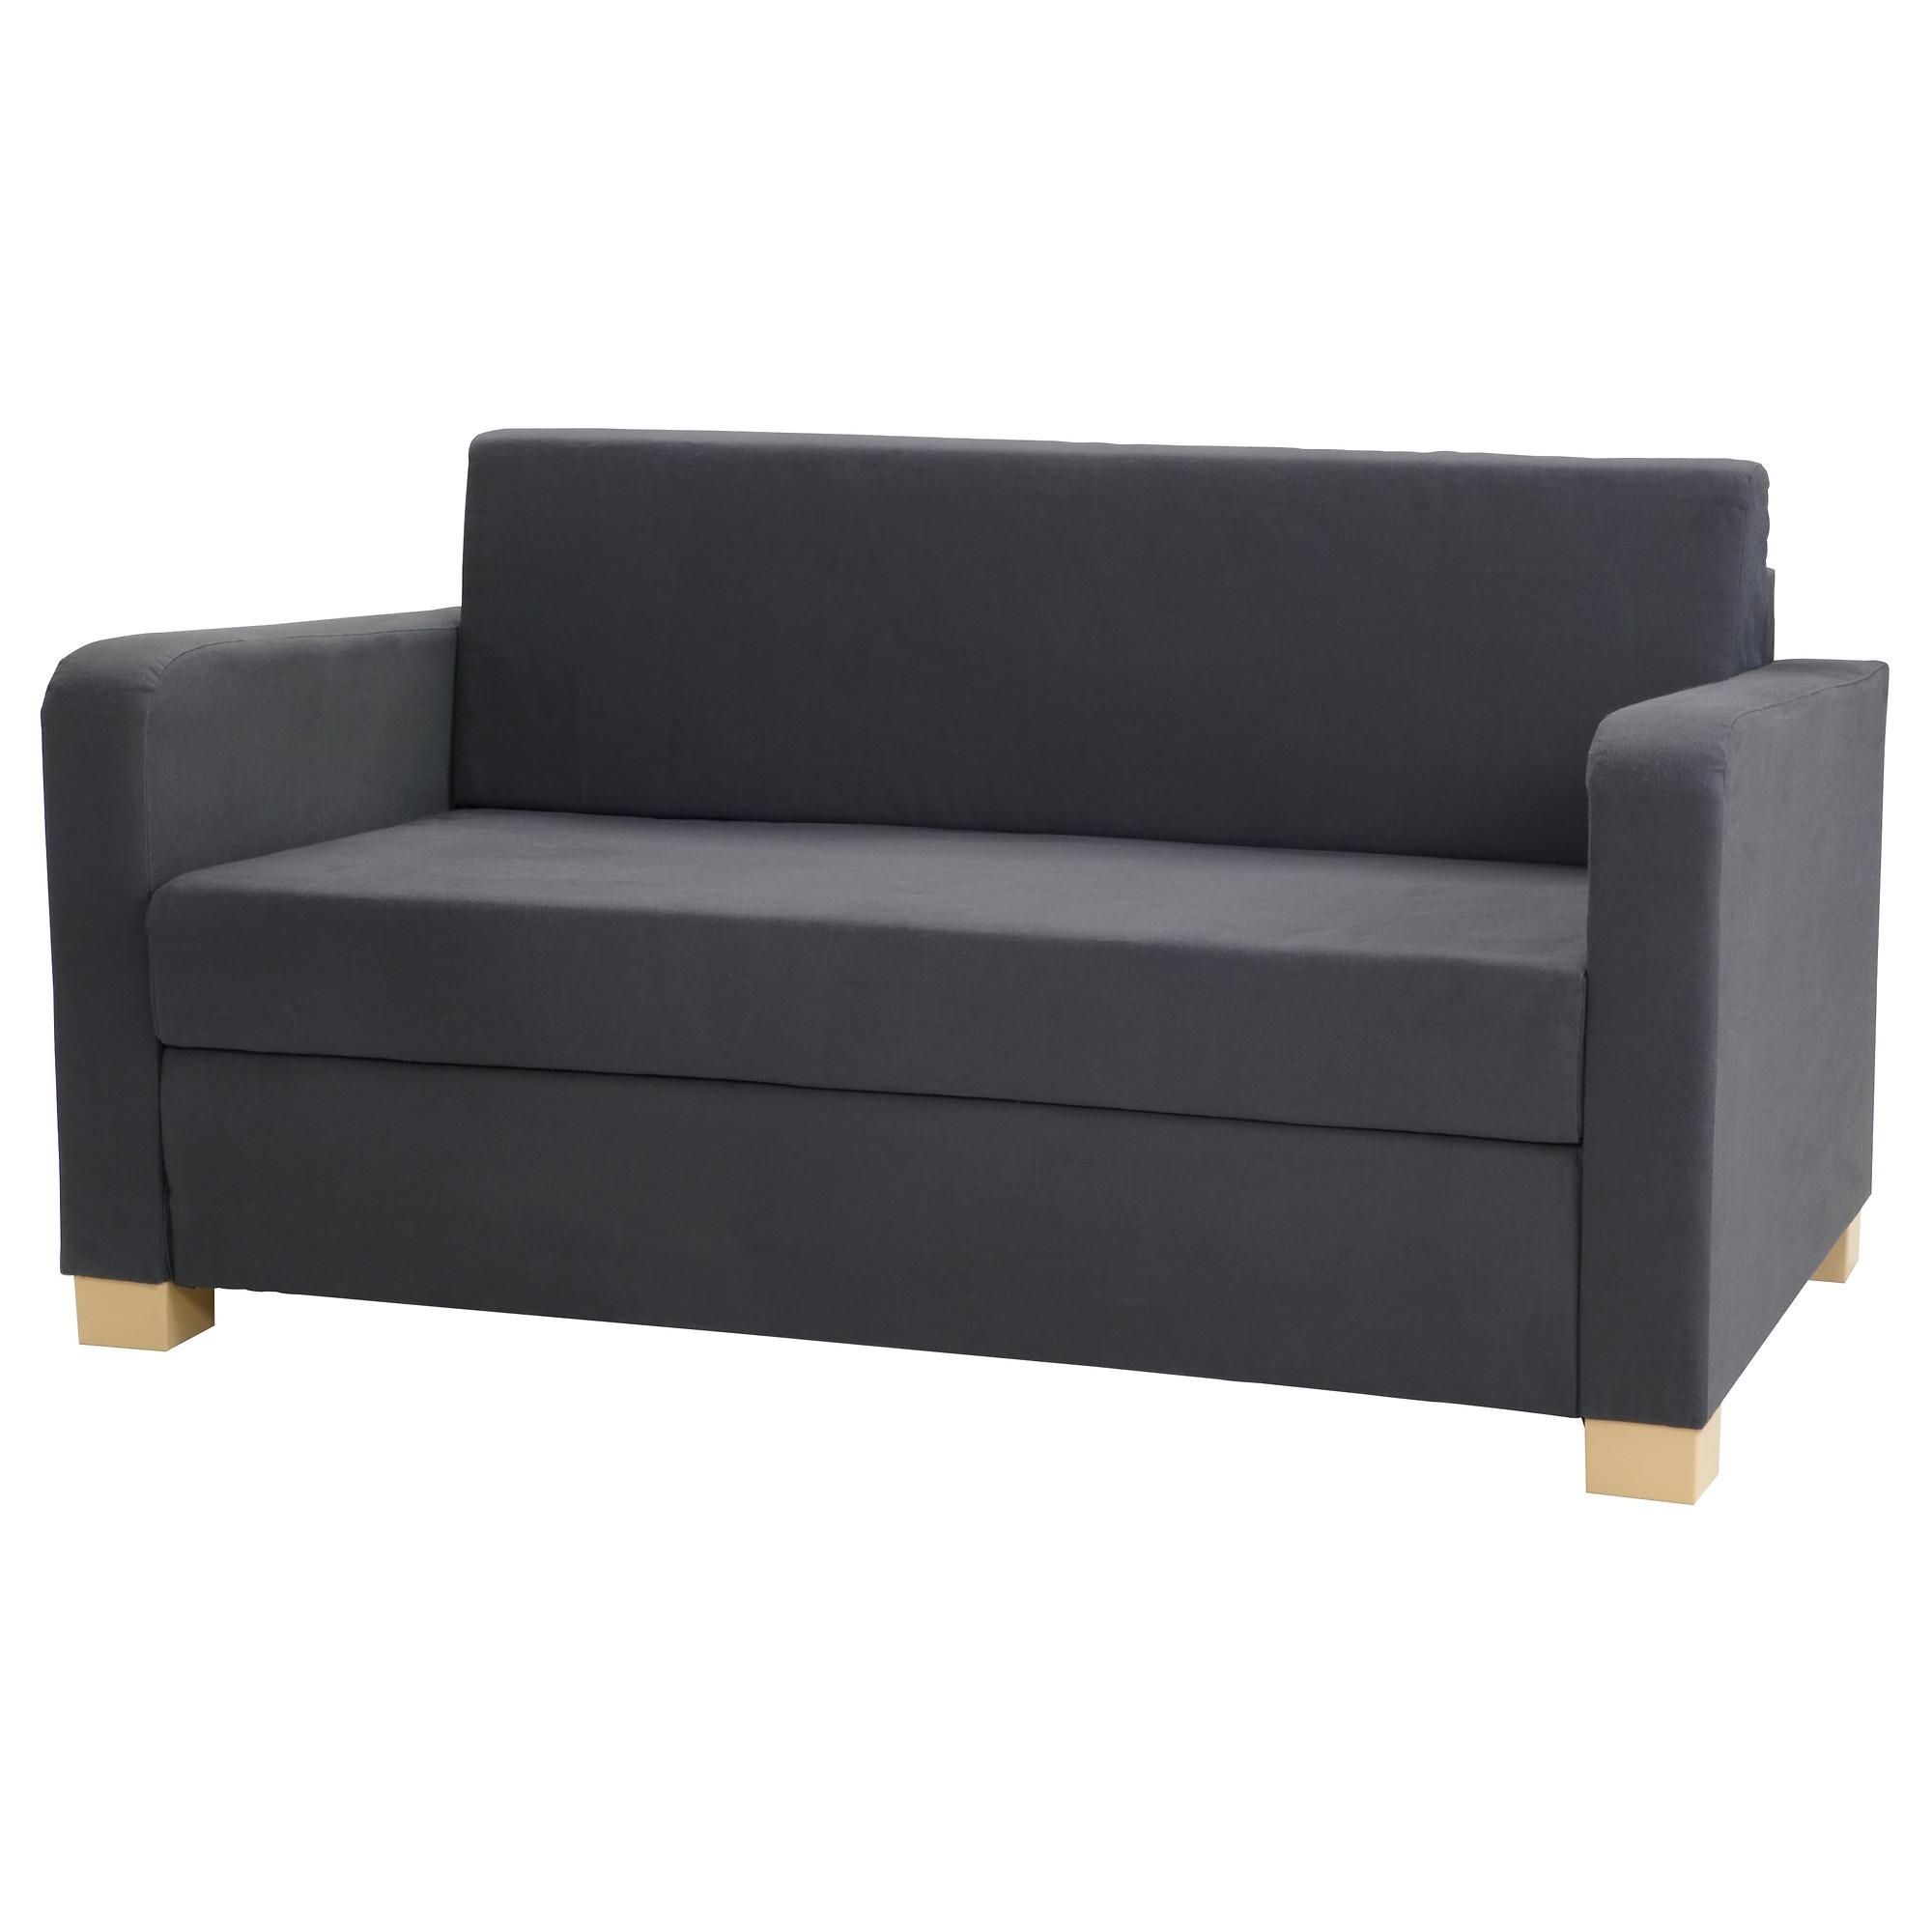 Sleeper Sofas & Chair Beds – Ikea With Regard To Sofa Chairs For Bedroom (View 12 of 20)